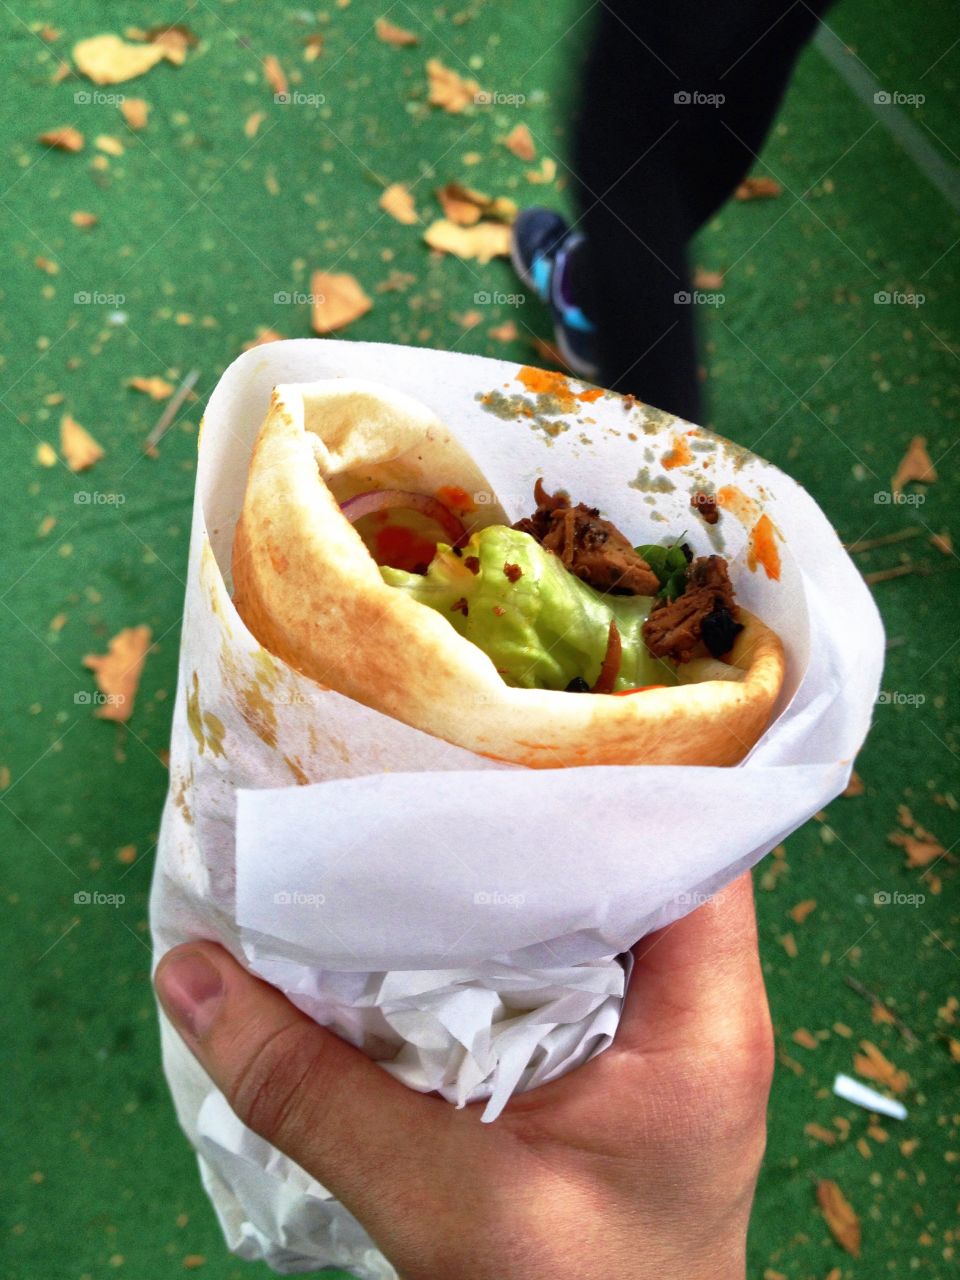 Chicken gyros from a street vendor in Yorkshire, UK.